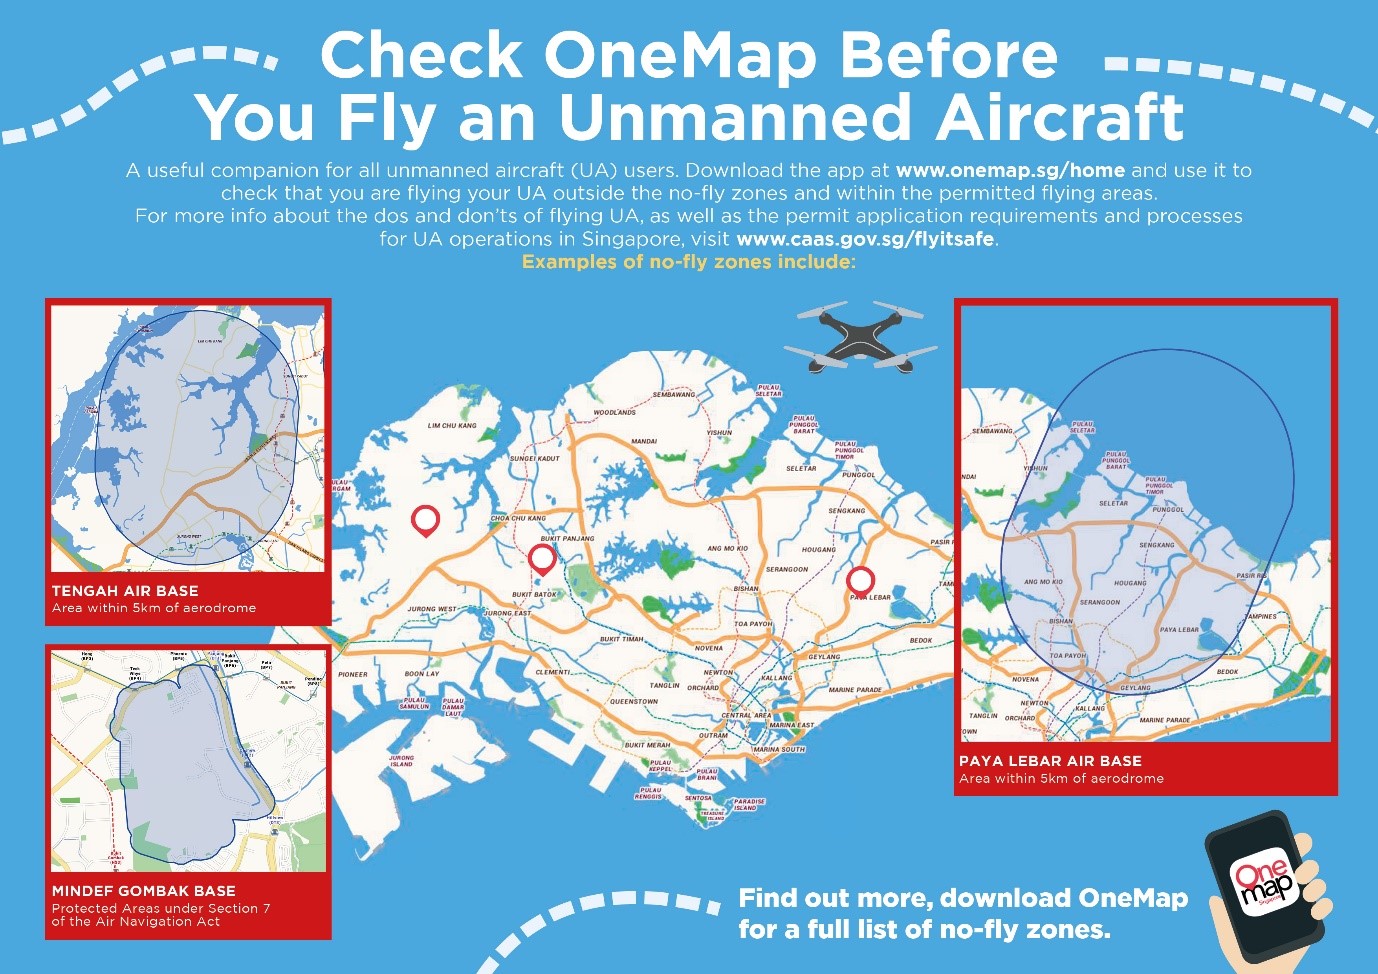 20201015_man_to_be_charged_with_flying_unmanned_aircraft_within_no-fly_zones_1